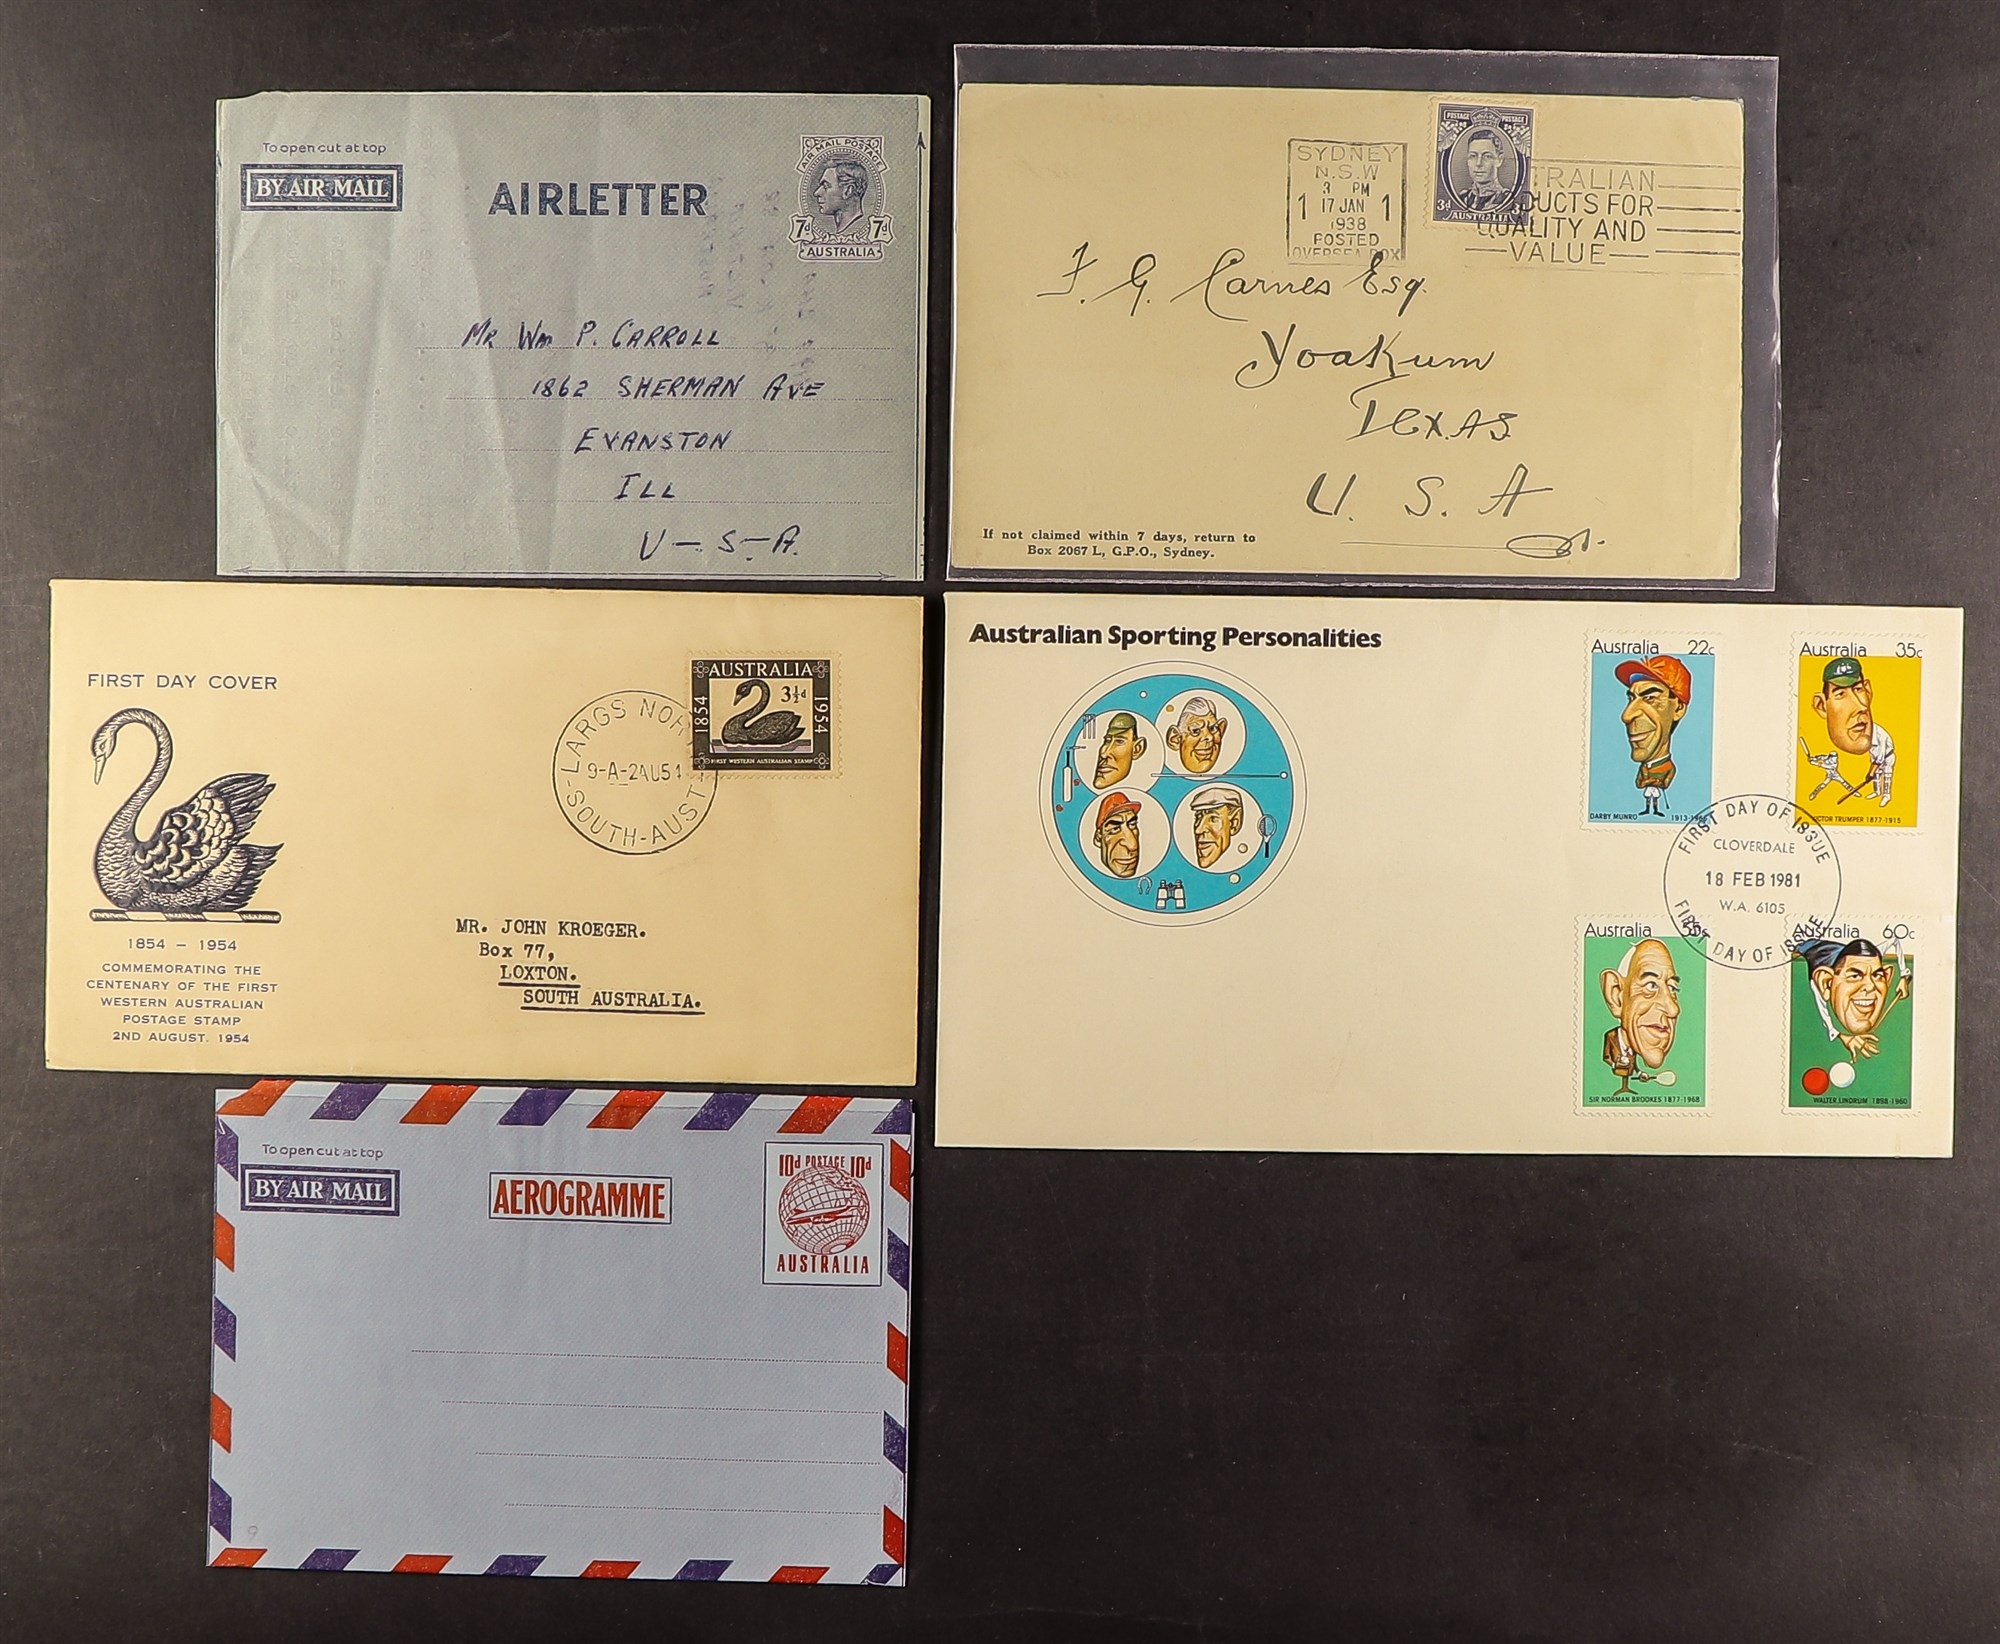 AUSTRALIA 1945 - 2012 COVERS a box with mainly unused postal Stationery cards with many complete - Image 3 of 5